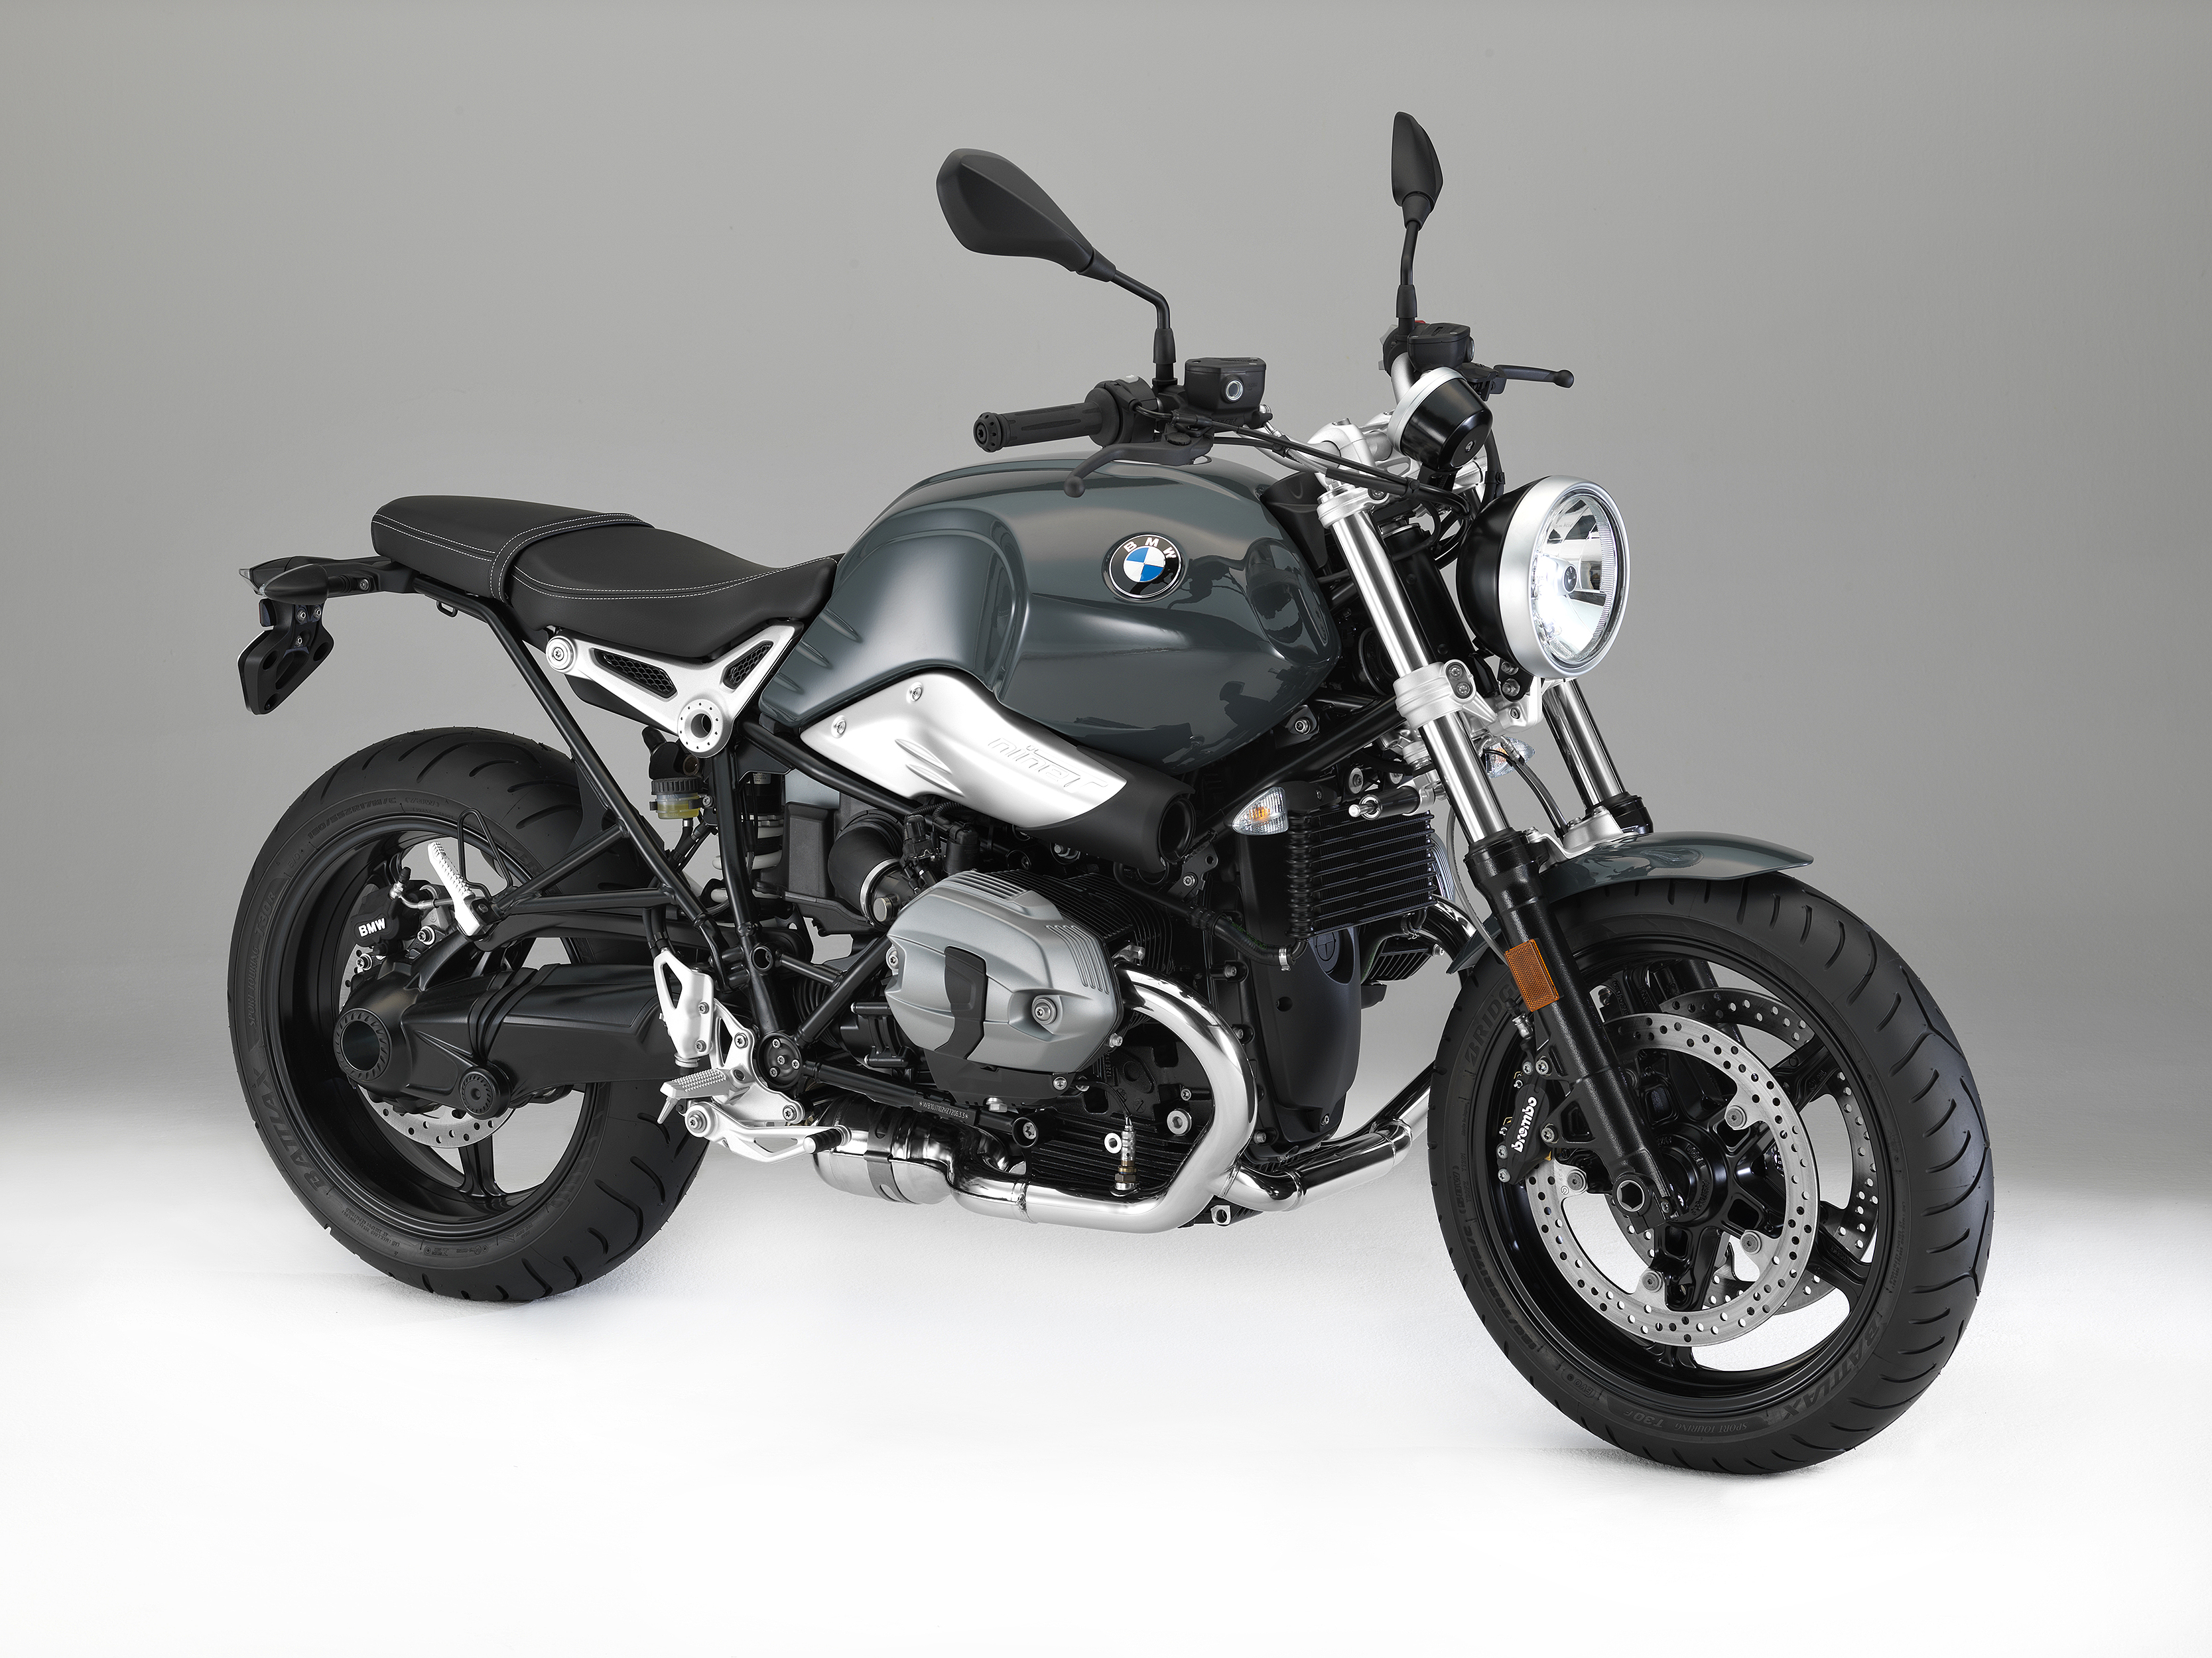 BMW reveals two new members of R nineT family